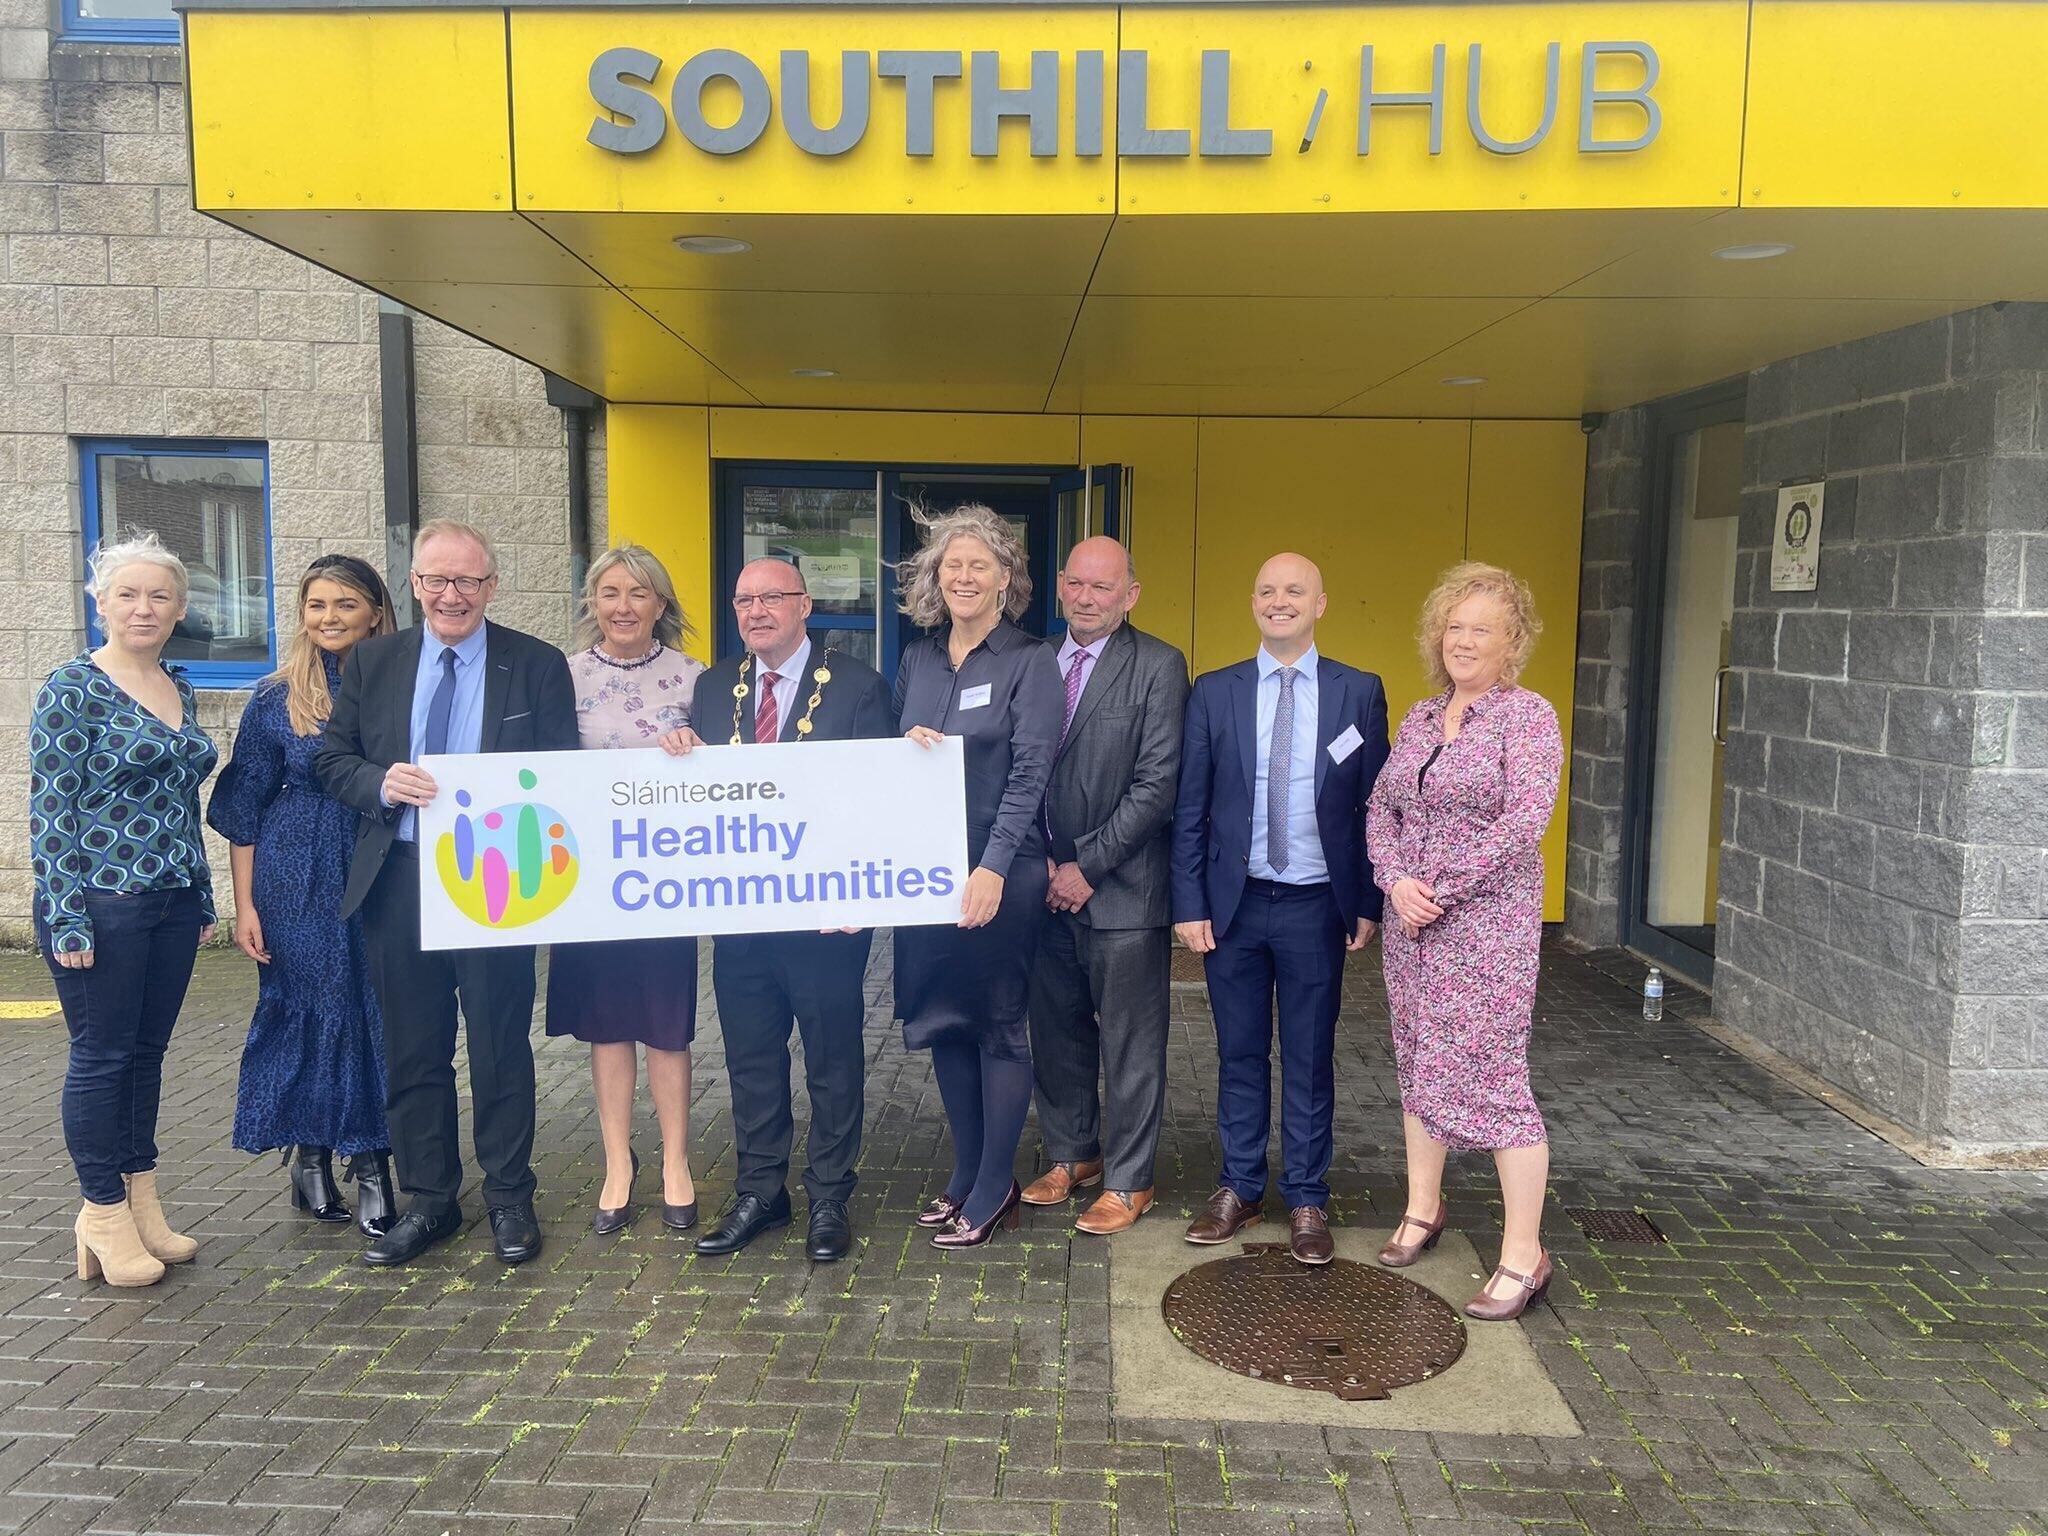 Slaintecare Healthy Communities launches in the Southill Hub, Limerick